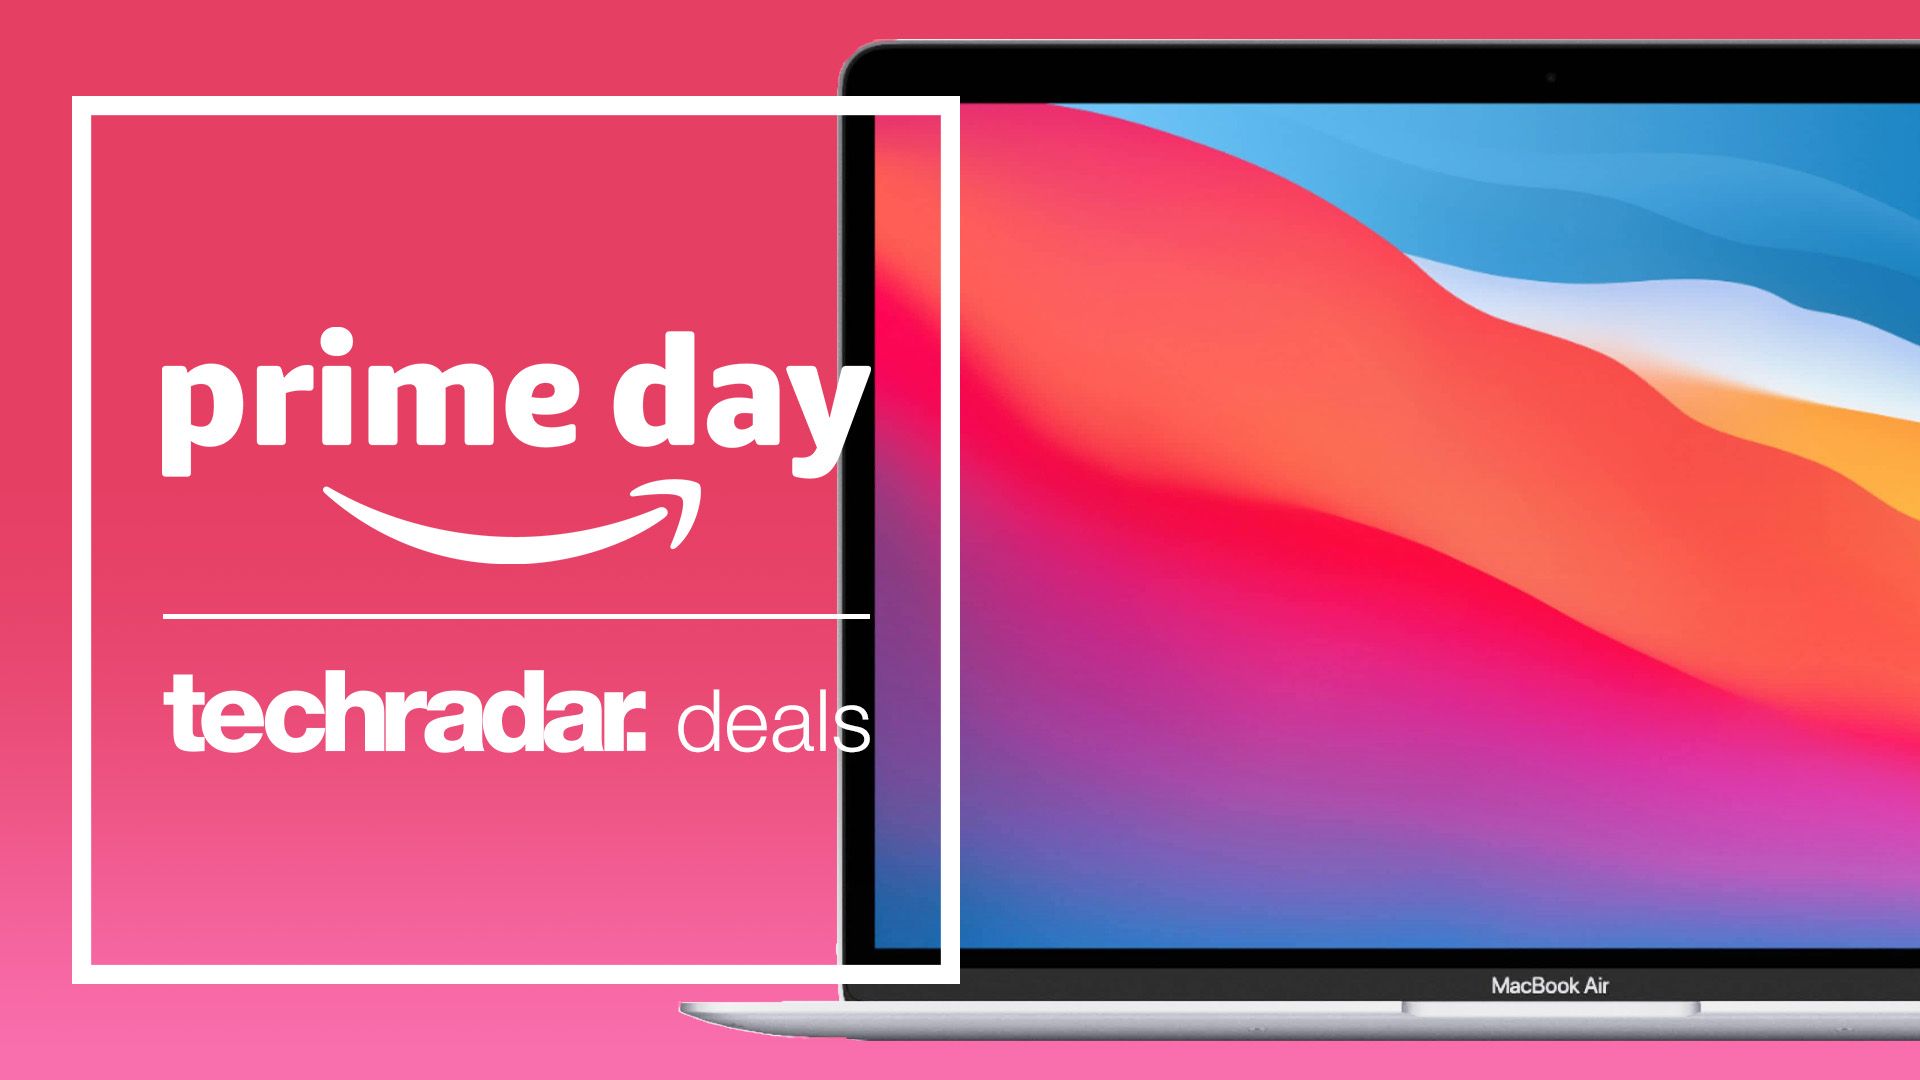 19 of the best laptop deals in the Prime Day sale at Amazon today